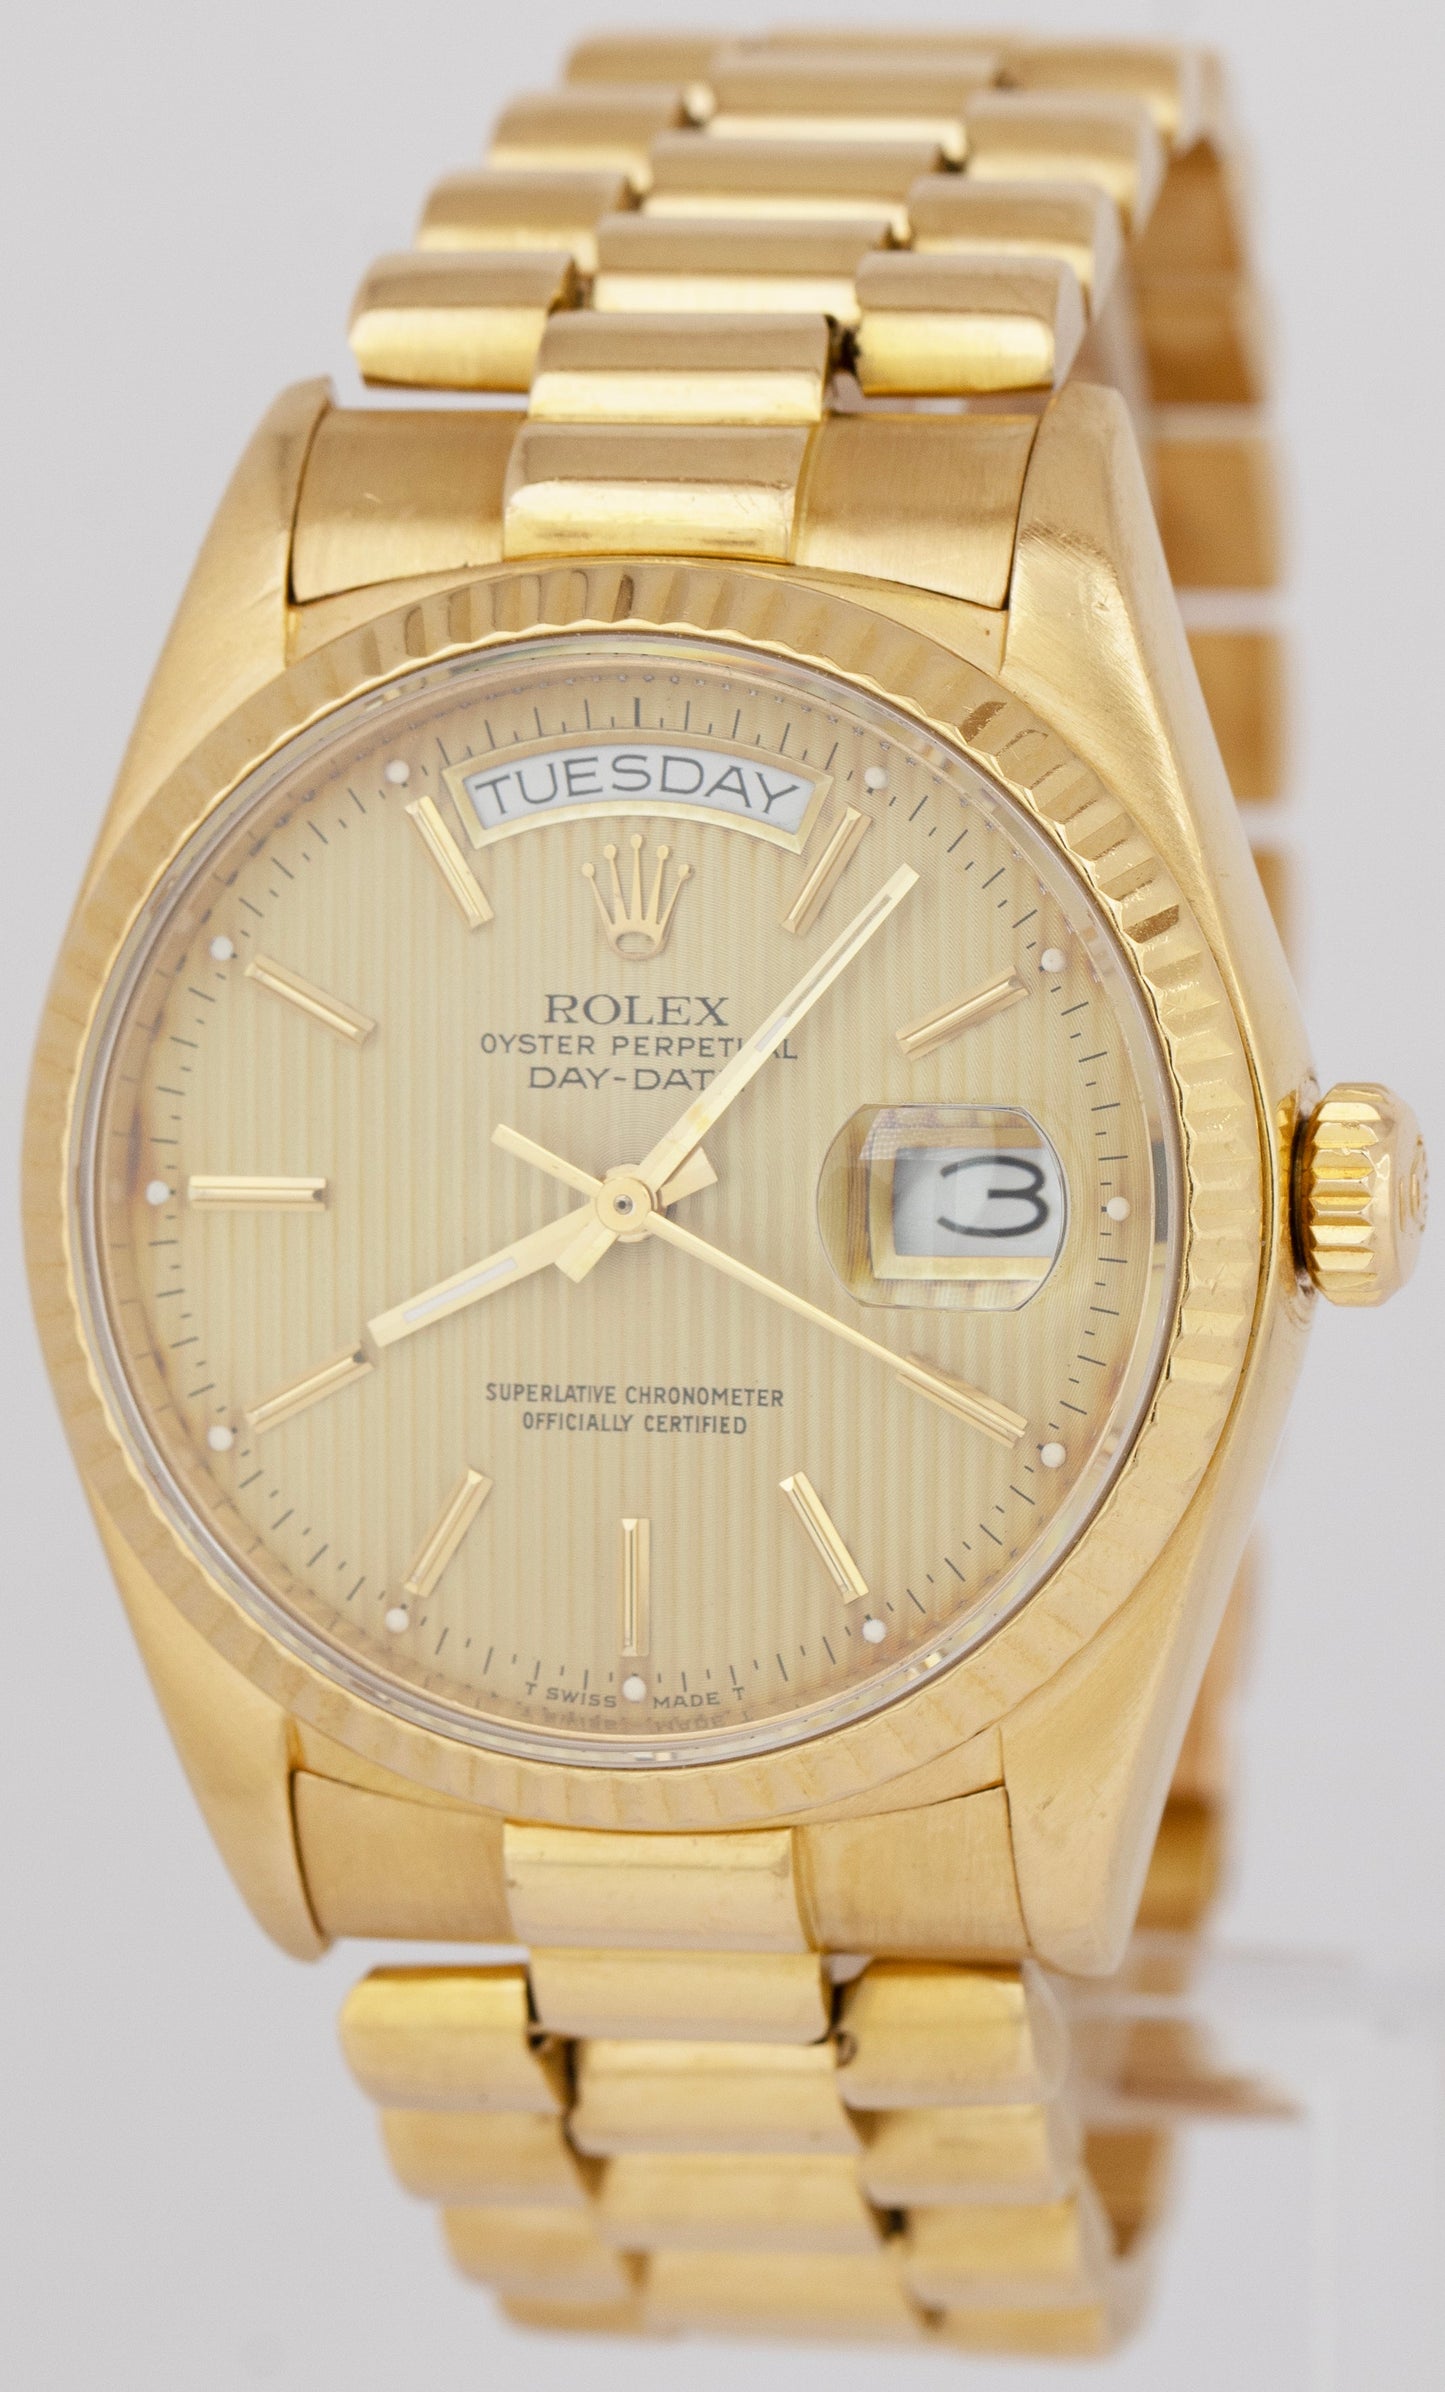 UNDATED Rolex Day-Date President Champagne Tapestry 36mm Watch 18038 PAPERS